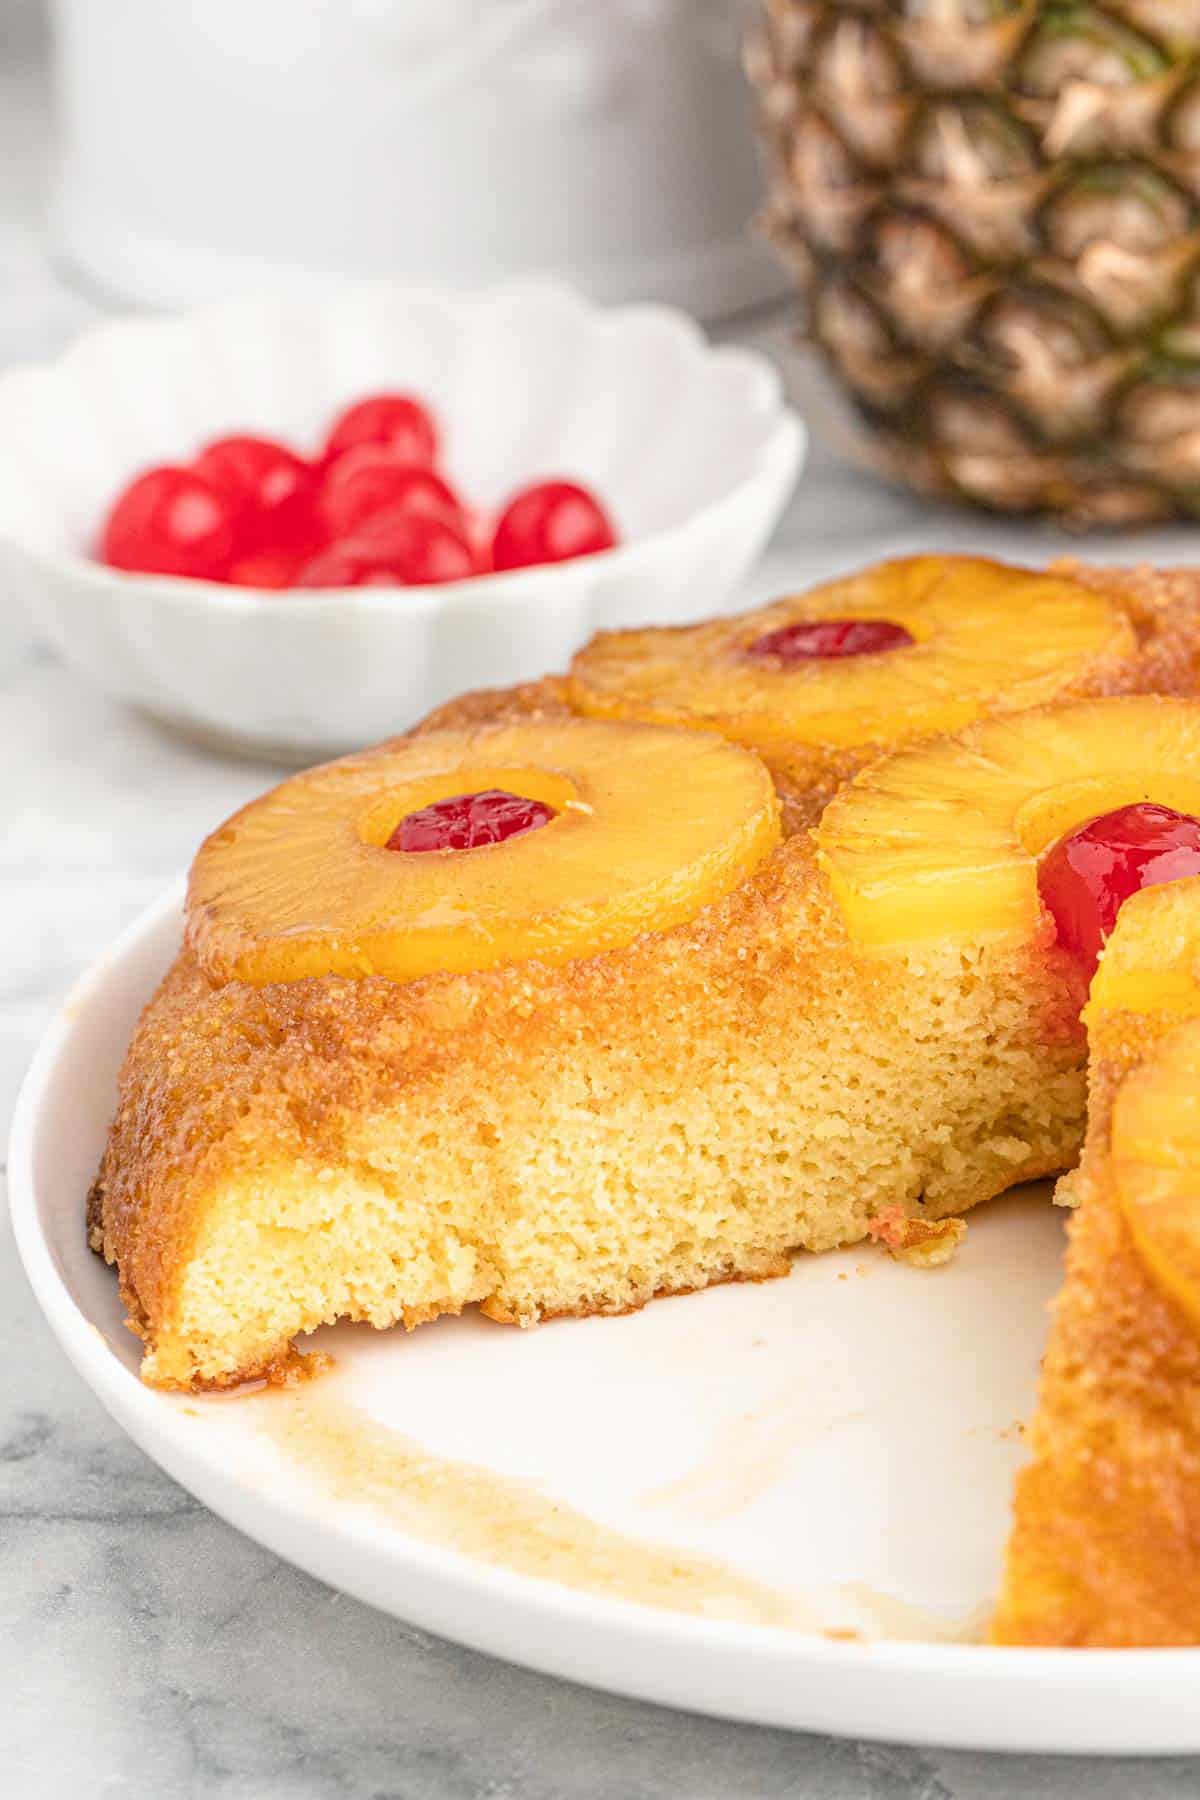 A pineapple upside down cake on a white platter with a slice cut out and a bowl of cherries in the background.